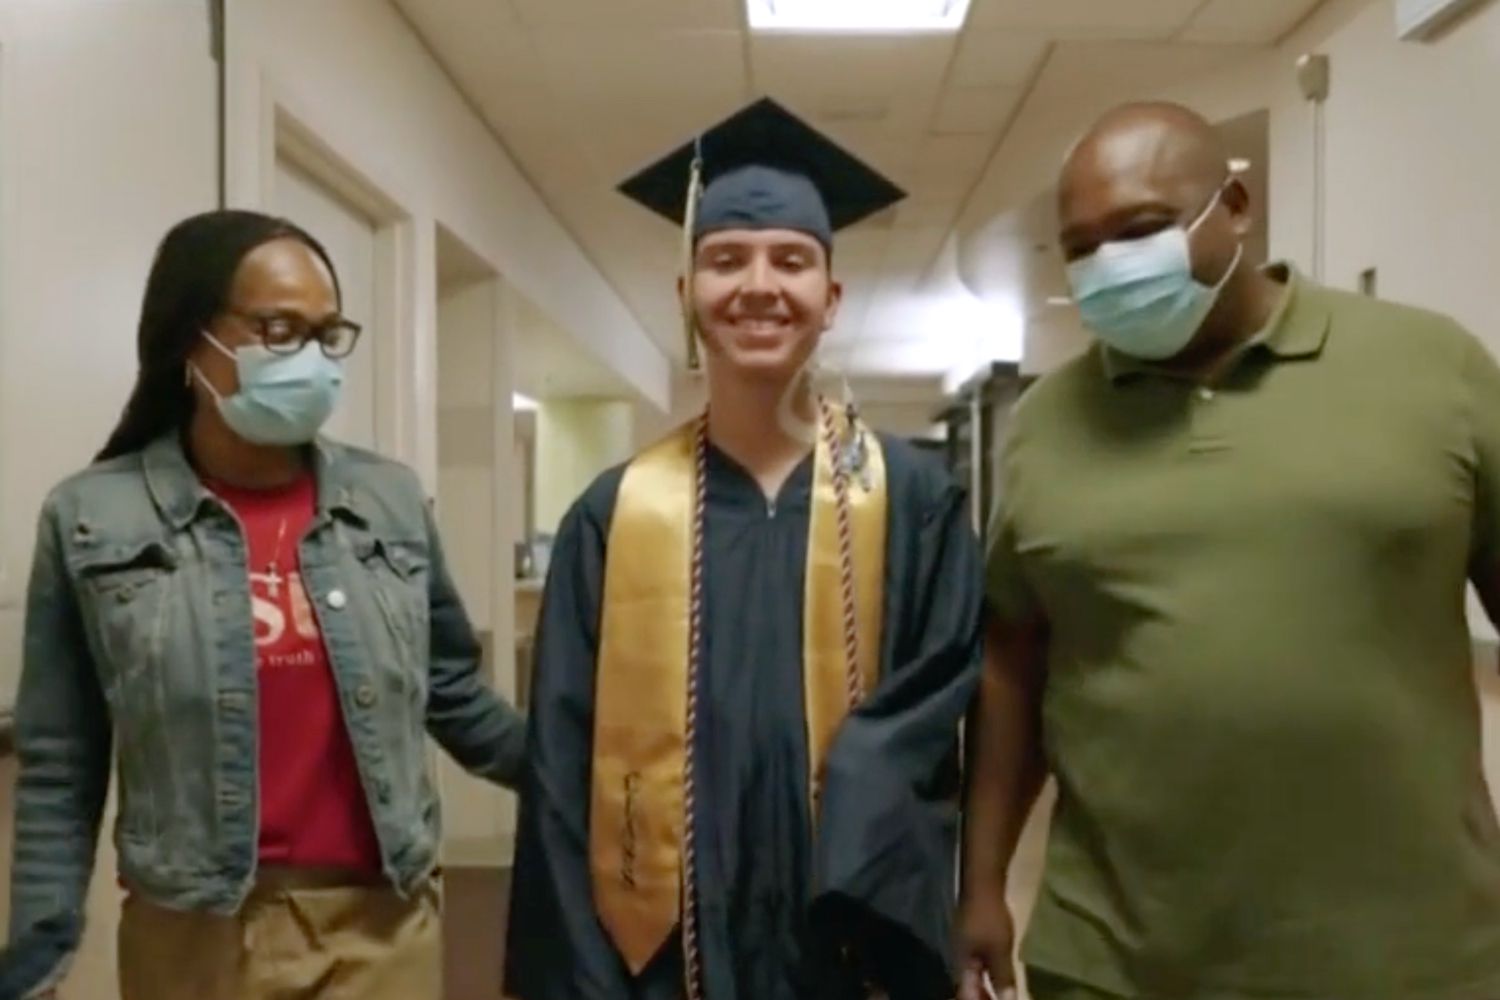 Heart Transplant Patient Surprised with Graduation Ceremony in Hospital [Video]